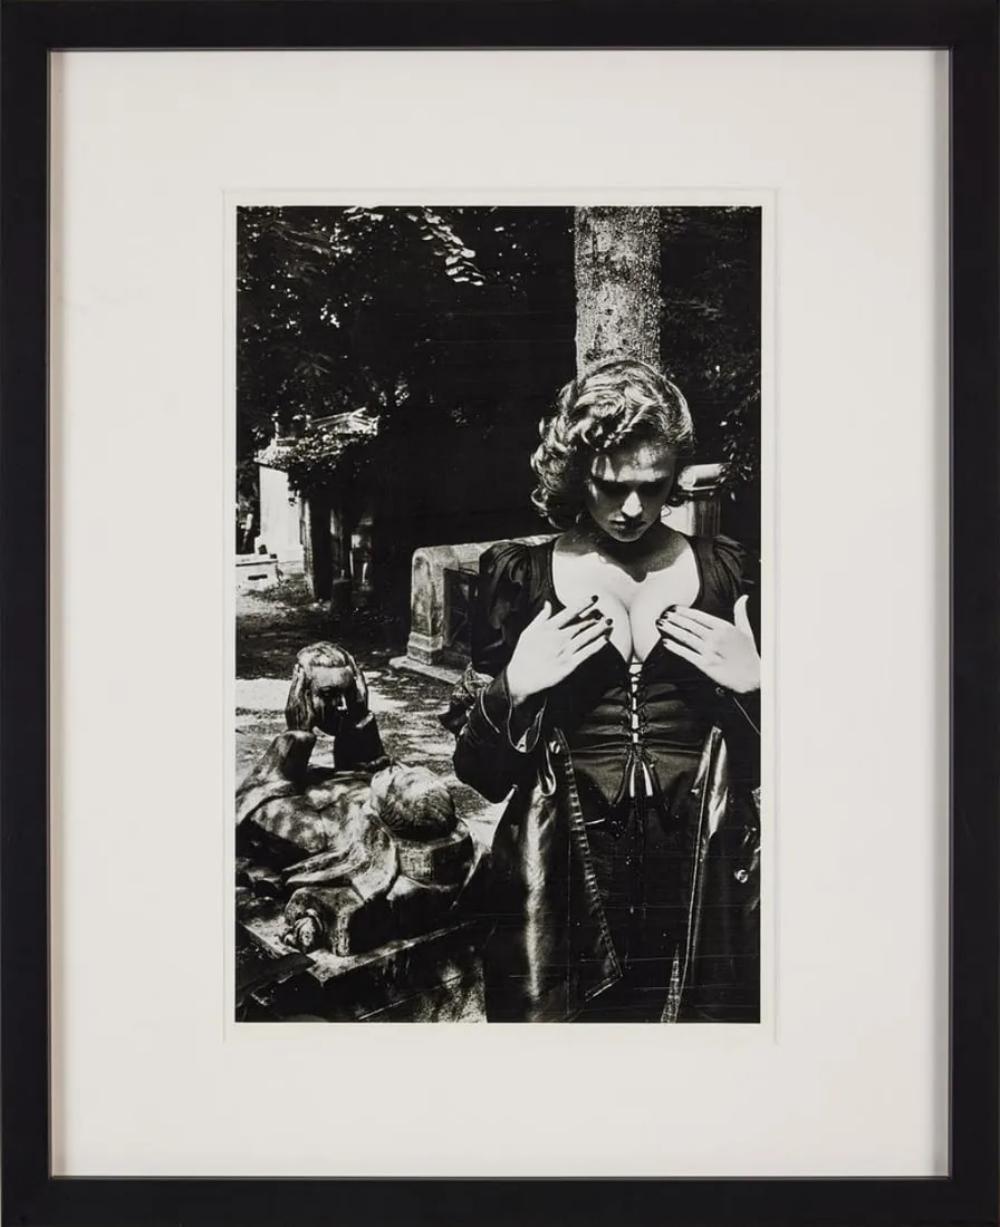 Helmut Newton Nude Photograph - HELMUT NEWTON 'PERE LACHAISE TOMB OF TALMA 1977' HAND SIGNED